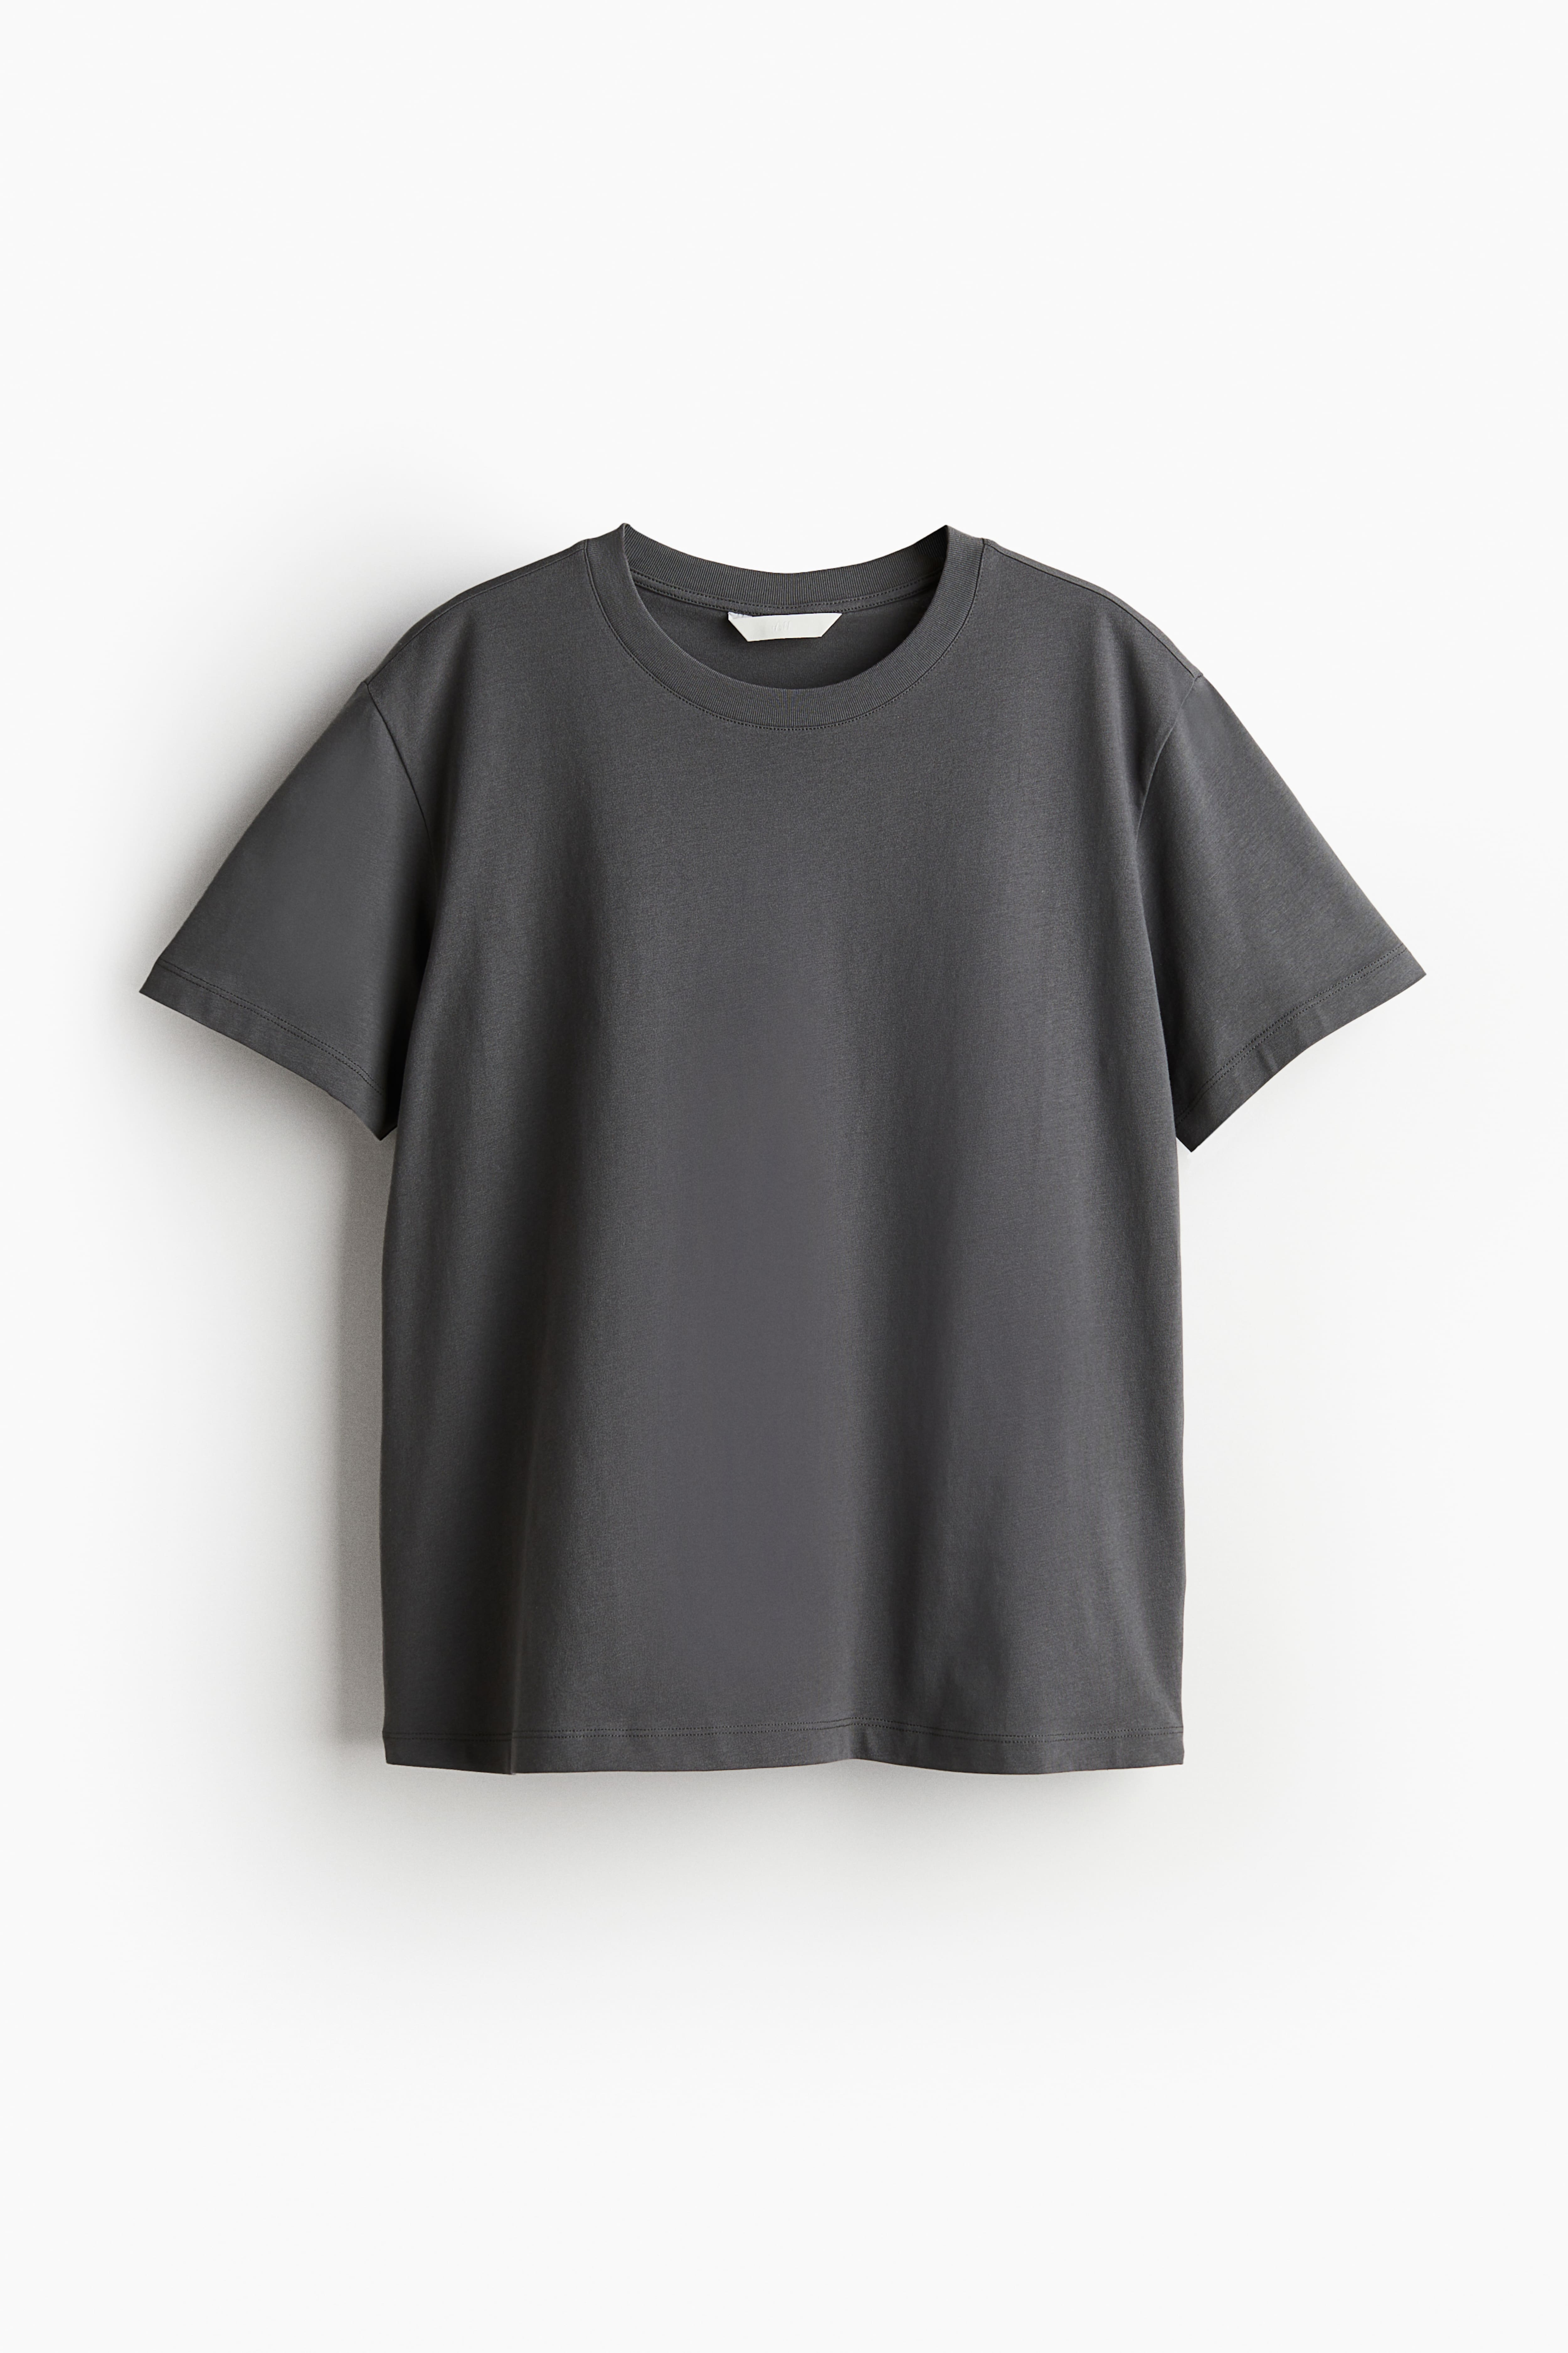 T-shirts for Women | Oversized, Printed & Crop T-shirts | H&M GB